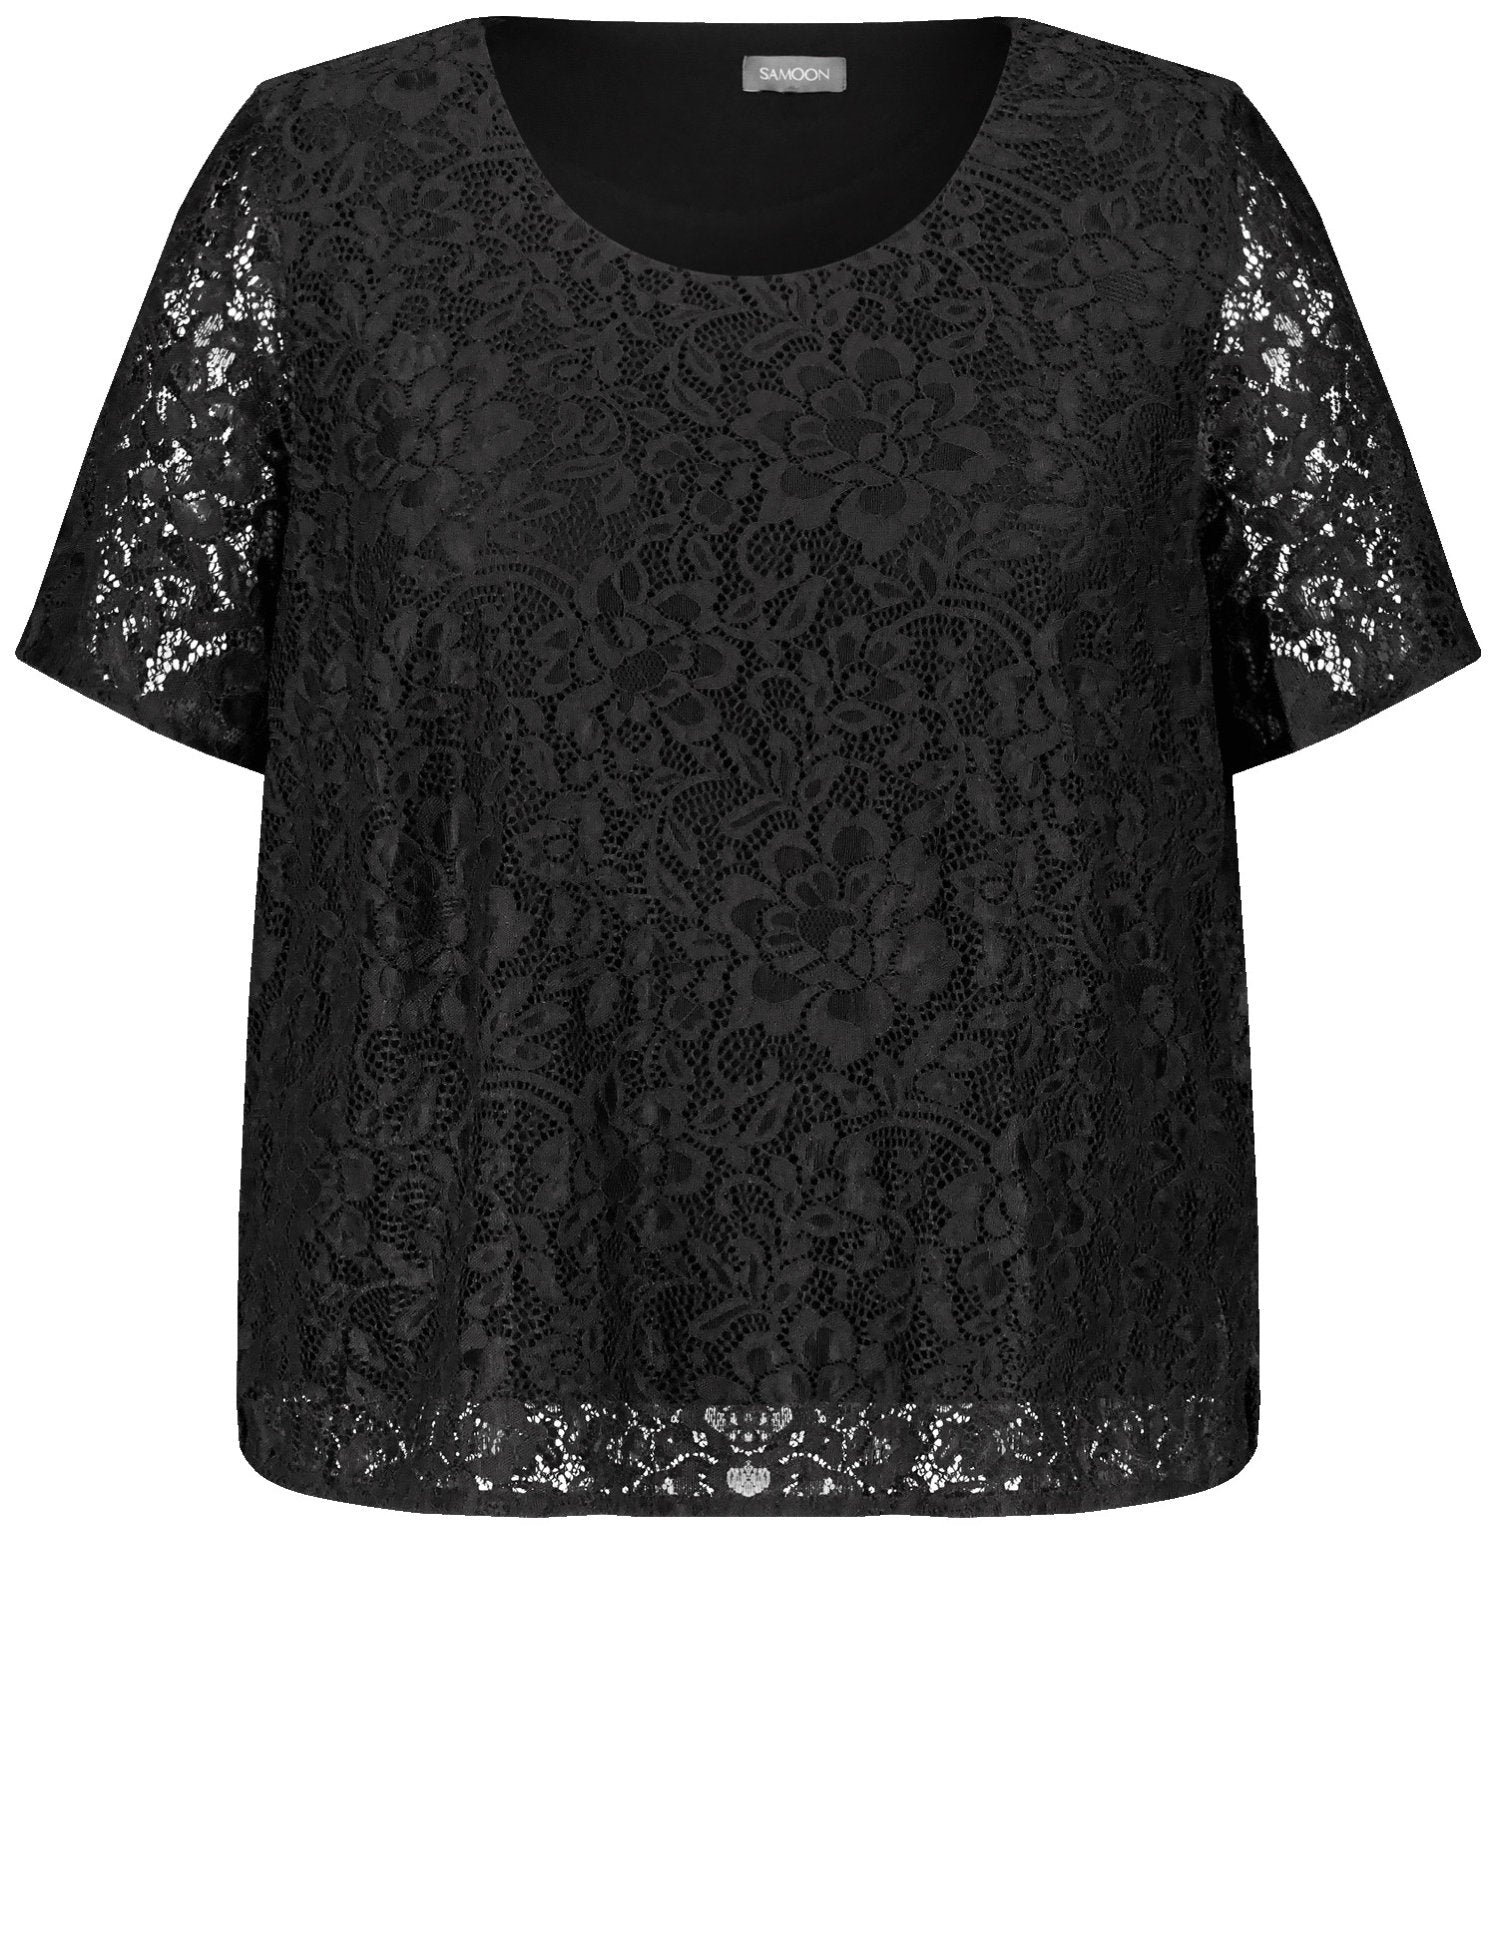 Lace Top_460024-21056_1100_07